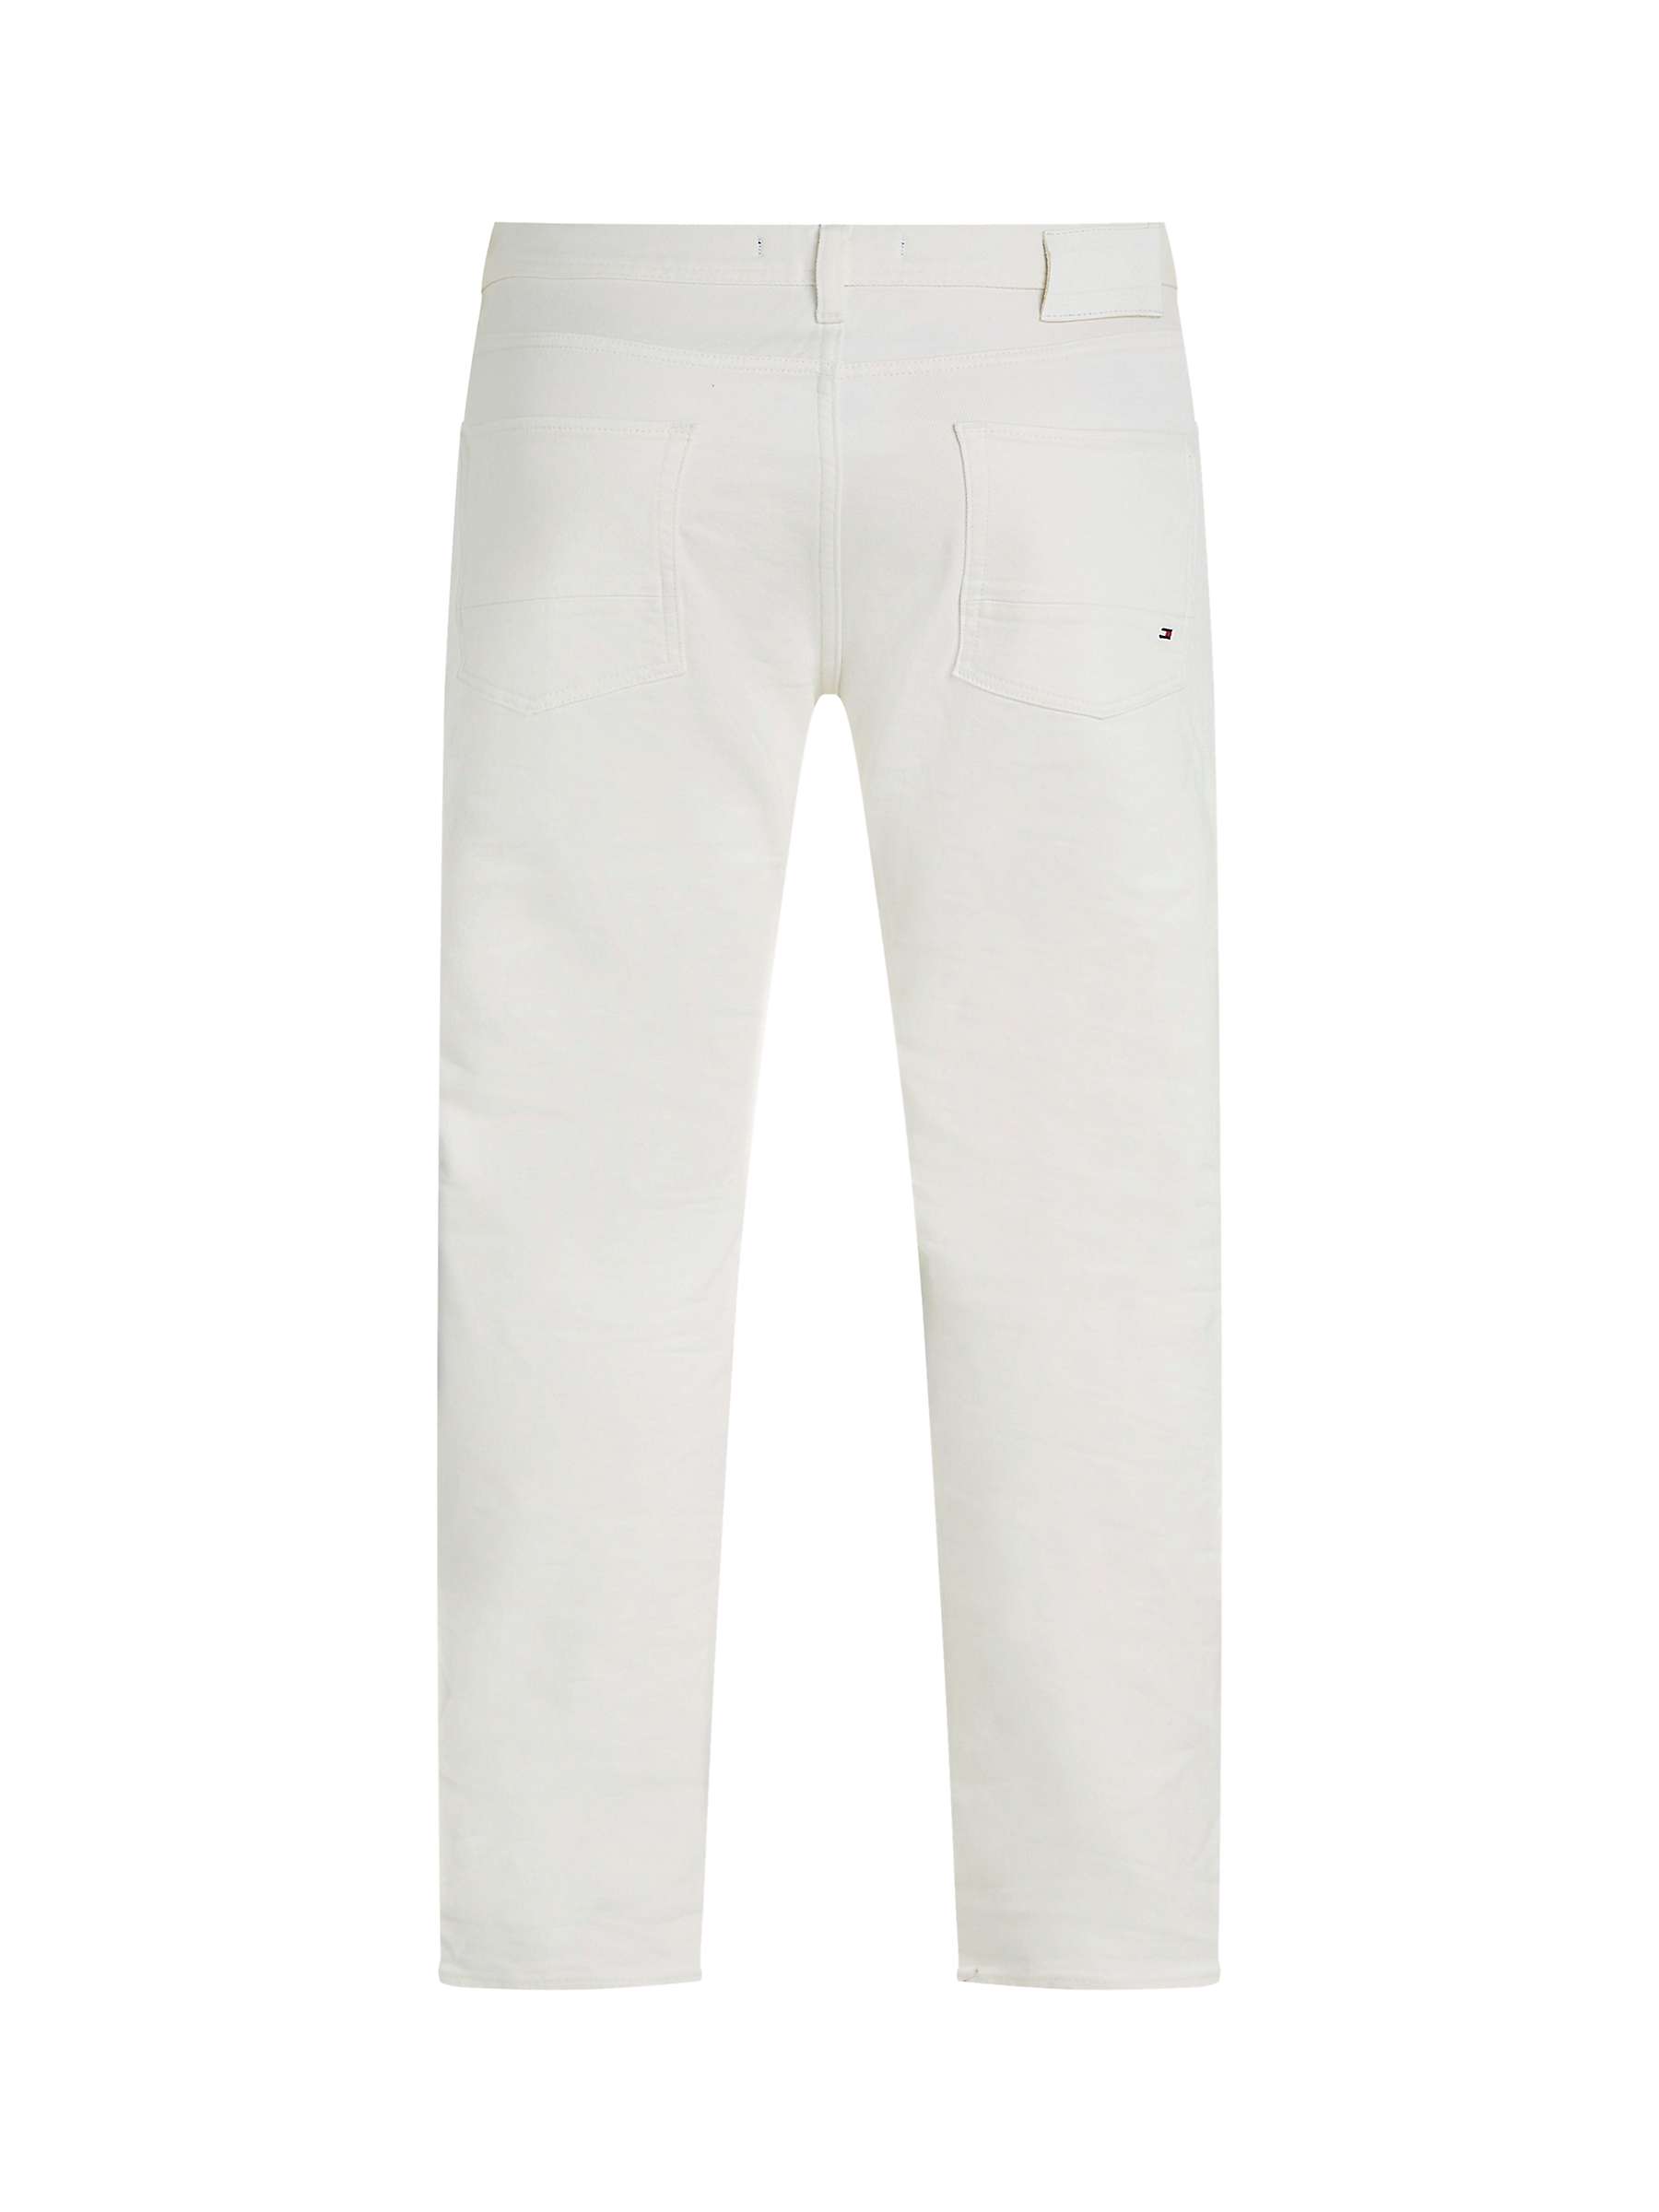 Buy Tommy Hilfiger Denton Straight Jeans, Gale White Online at johnlewis.com